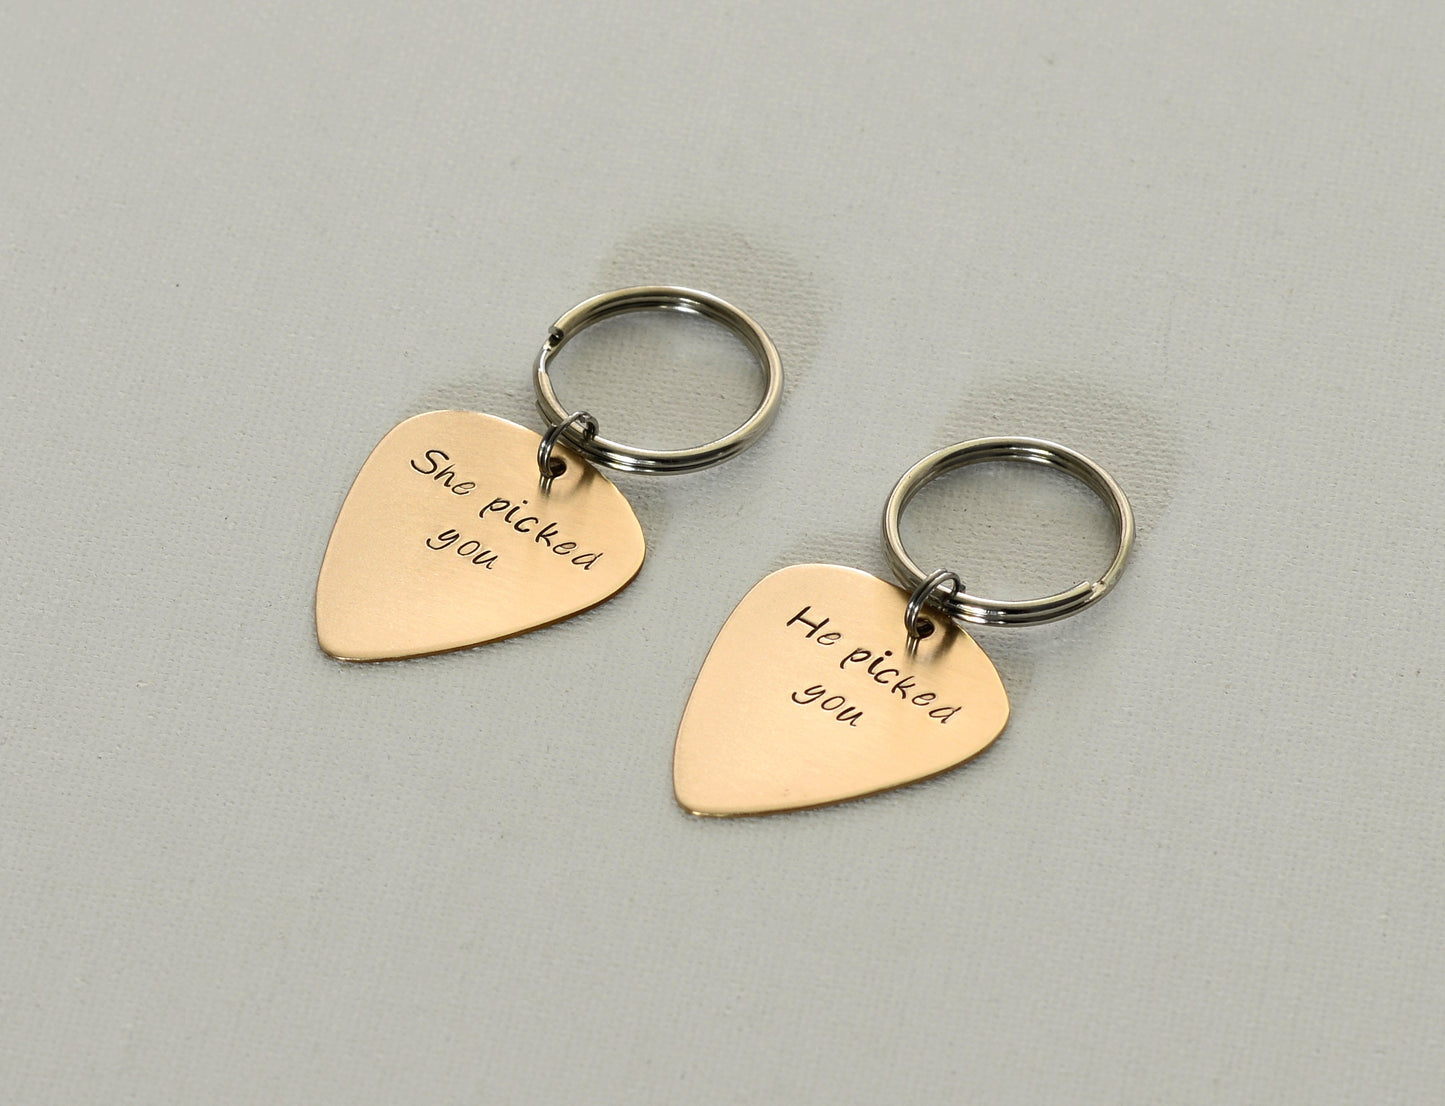 He picked you – She picked you - Couples Guitar Pick Keychain Set